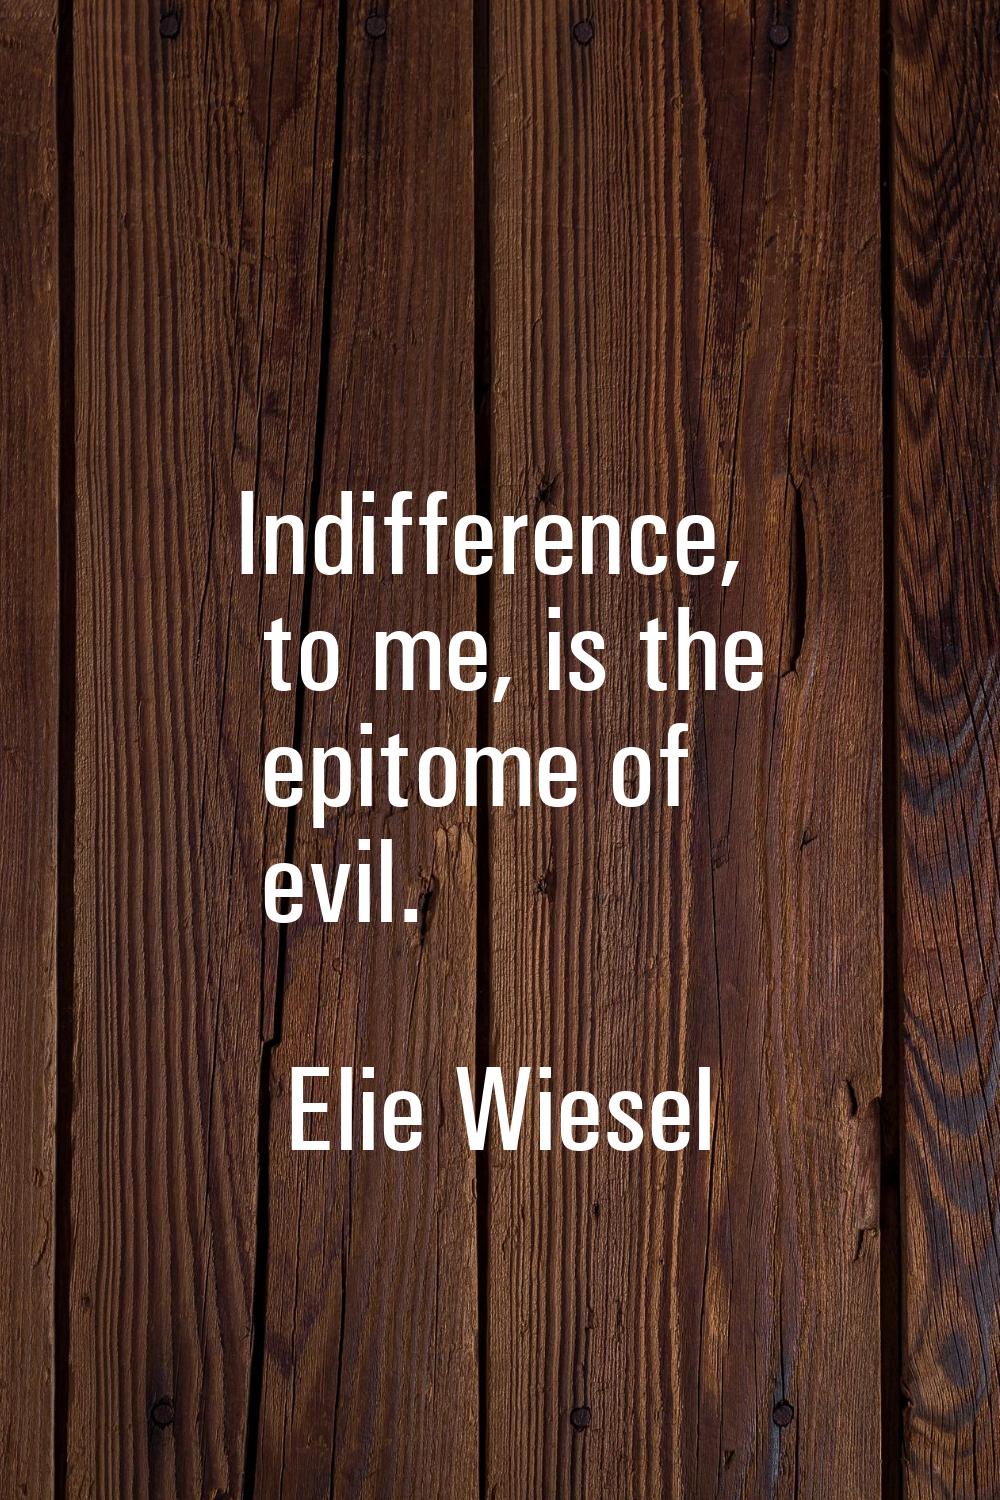 Indifference, to me, is the epitome of evil.